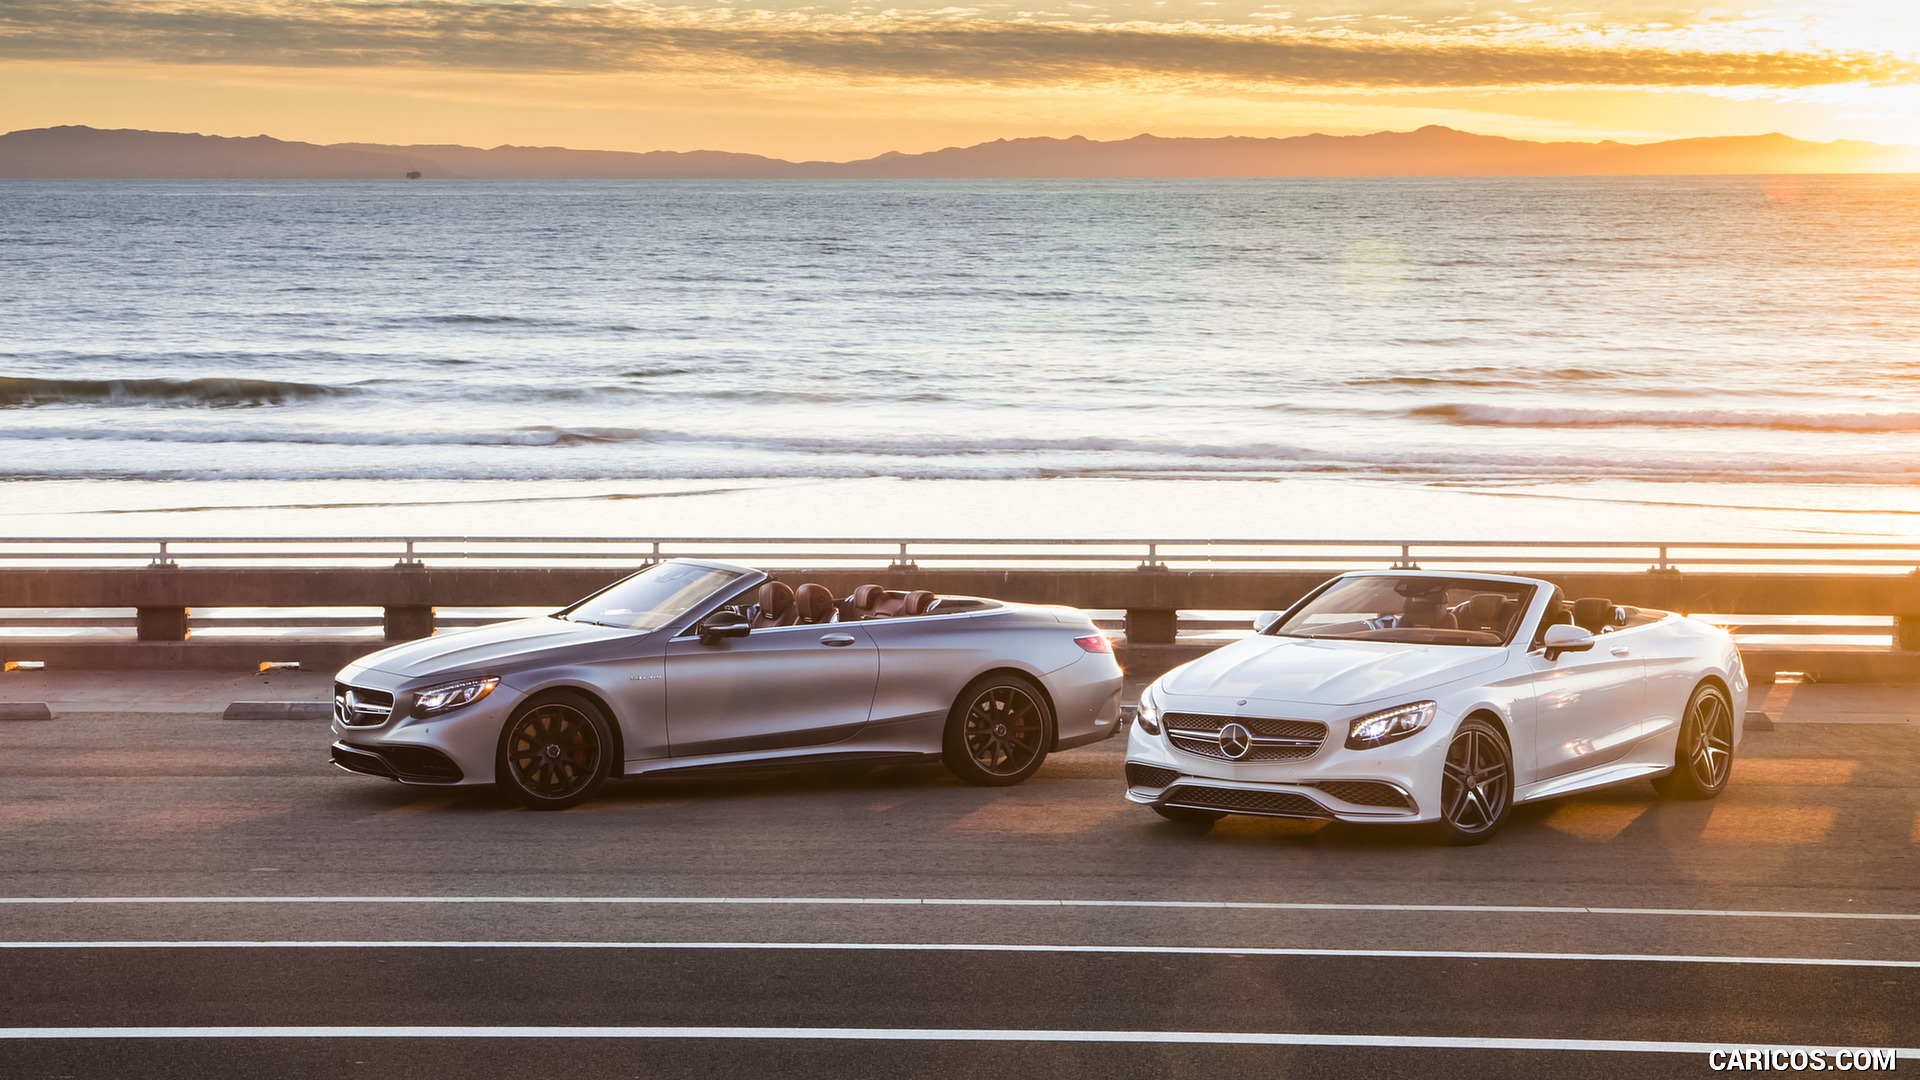 2017 Mercedes-AMG S63 Cabriolet (US-Spec) and S65 AMG Cabriolet, #65 of 65